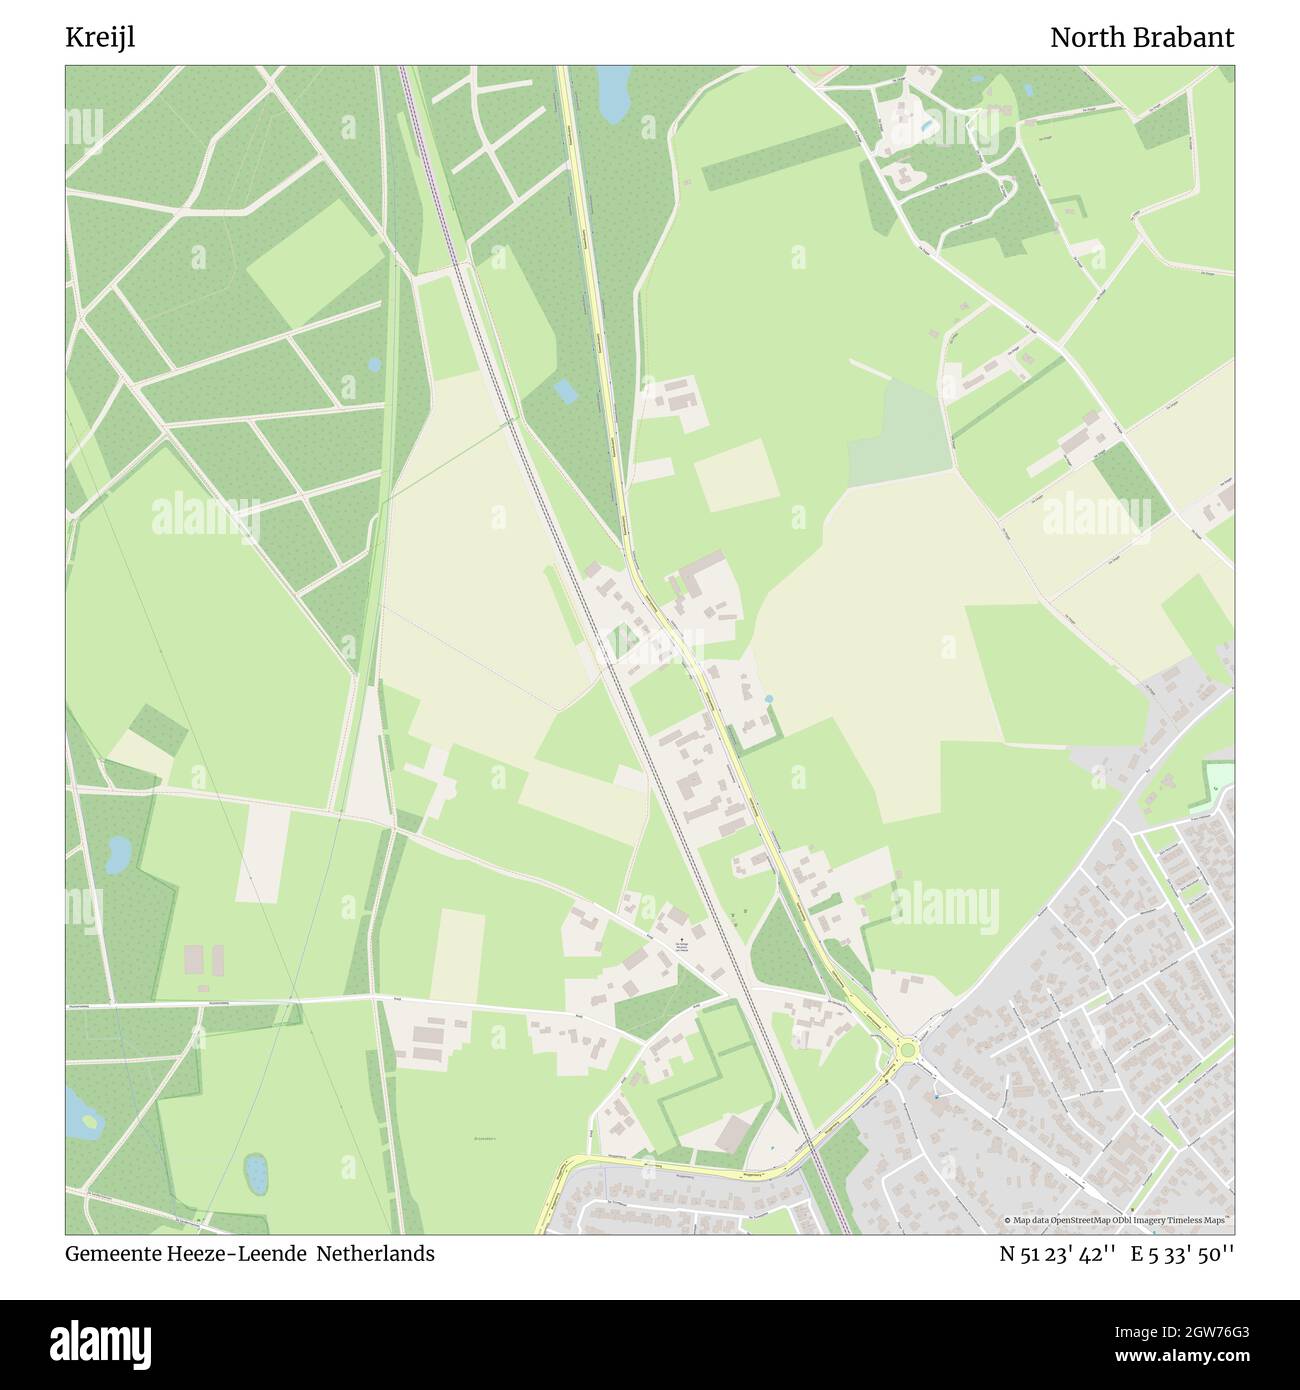 Kreijl, Gemeente Heeze-Leende, Netherlands, North Brabant, N 51 23' 42'', E 5 33' 50'', map, Timeless Map published in 2021. Travelers, explorers and adventurers like Florence Nightingale, David Livingstone, Ernest Shackleton, Lewis and Clark and Sherlock Holmes relied on maps to plan travels to the world's most remote corners, Timeless Maps is mapping most locations on the globe, showing the achievement of great dreams Stock Photo